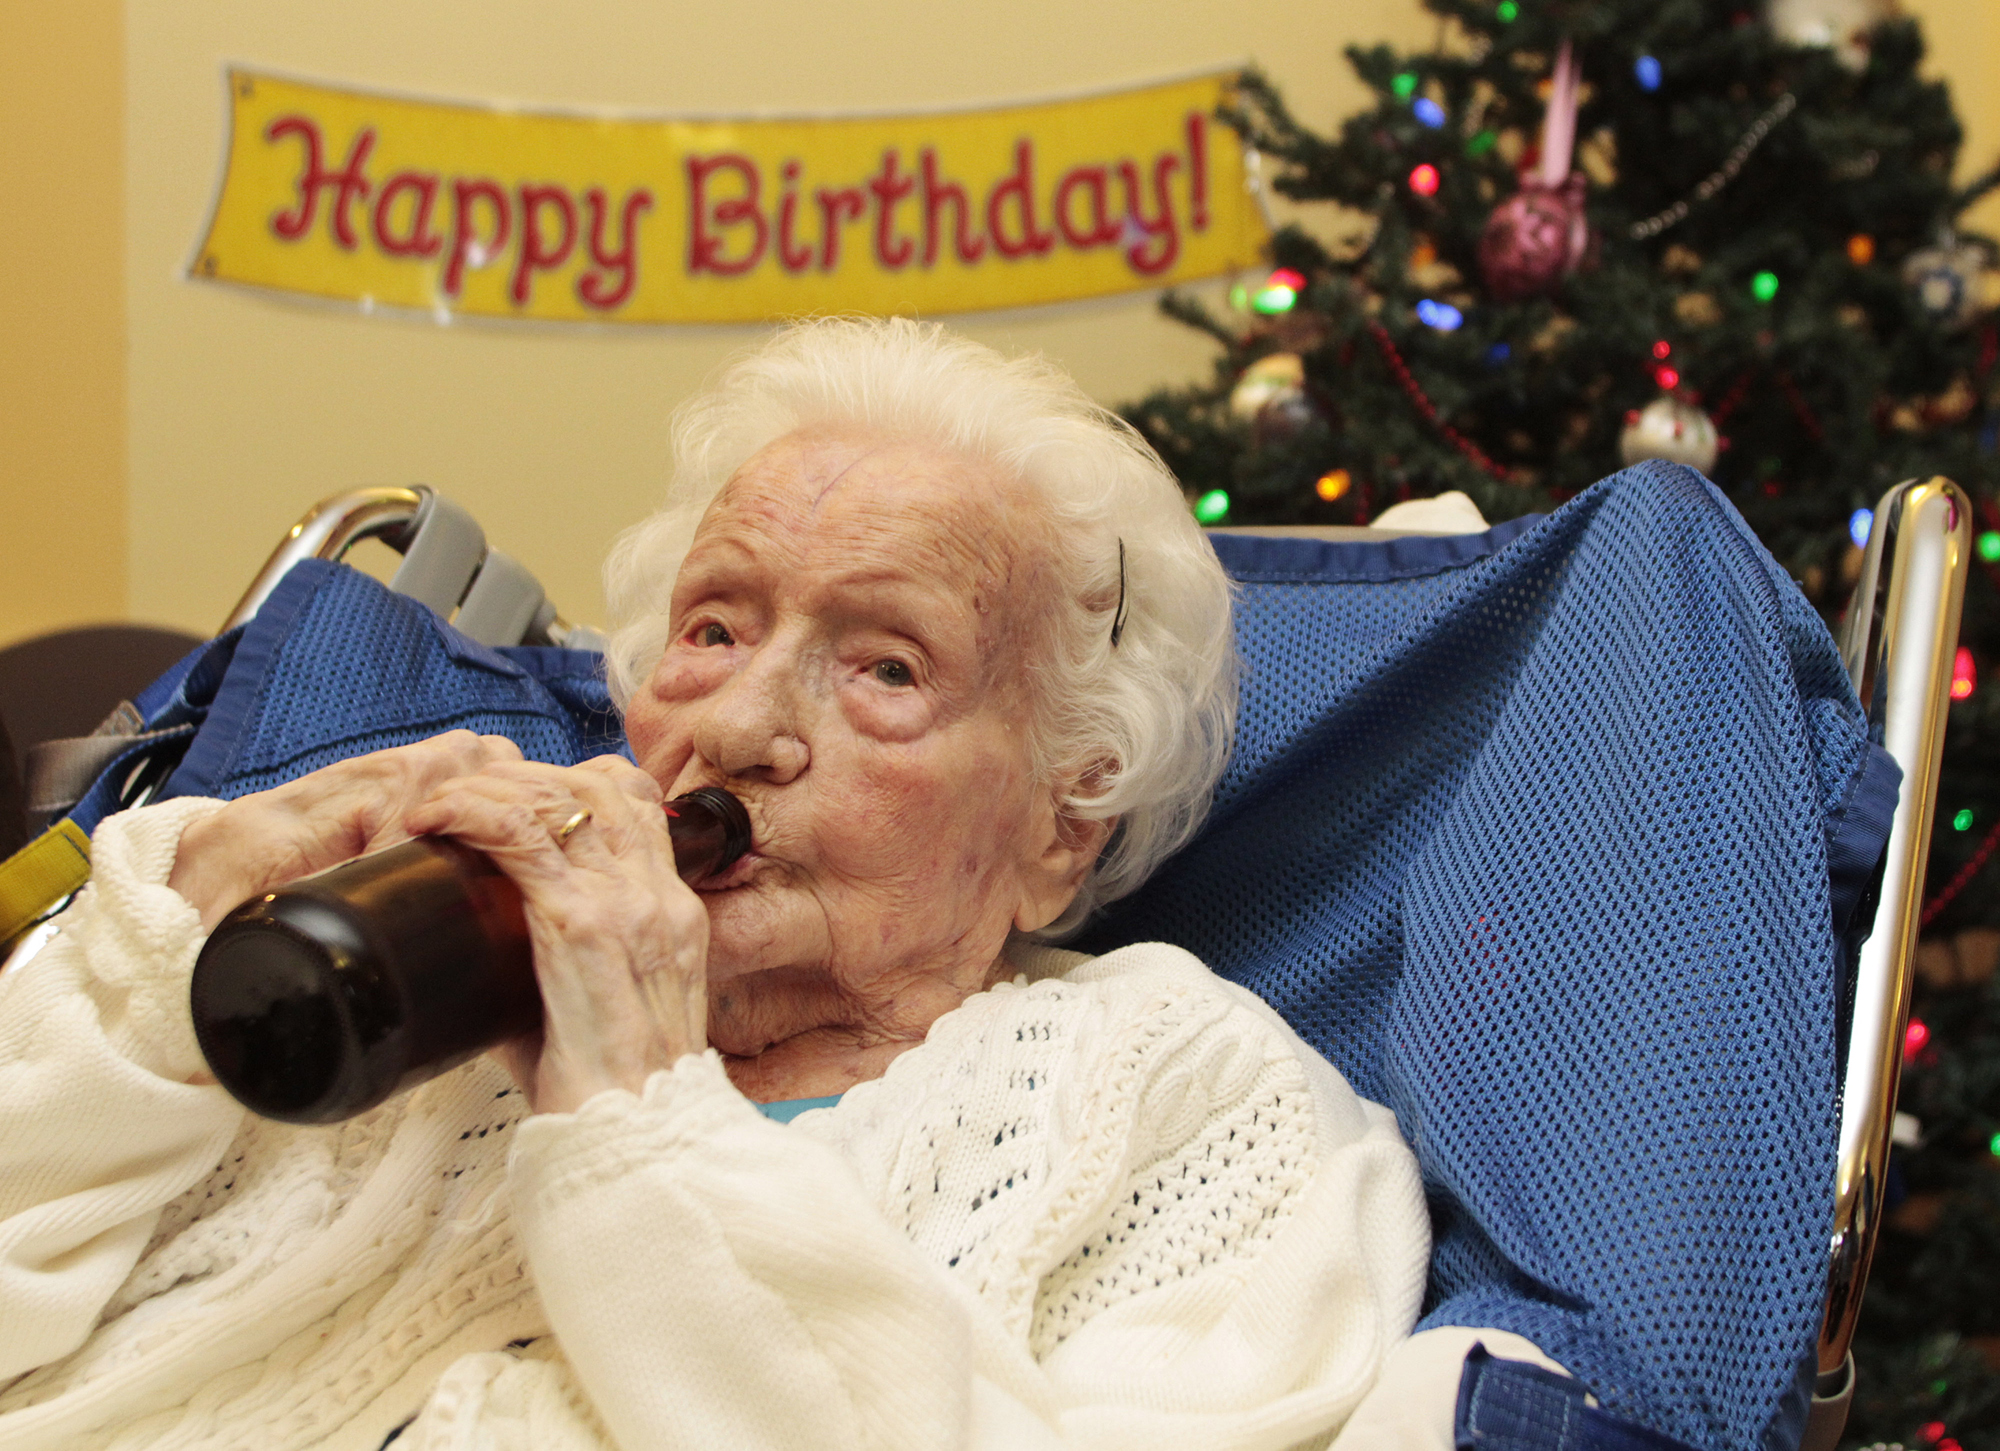 Merle Barwis, 111 years old enjoys a birthday beer with family in Victoria, B.C. December 23, 2011.